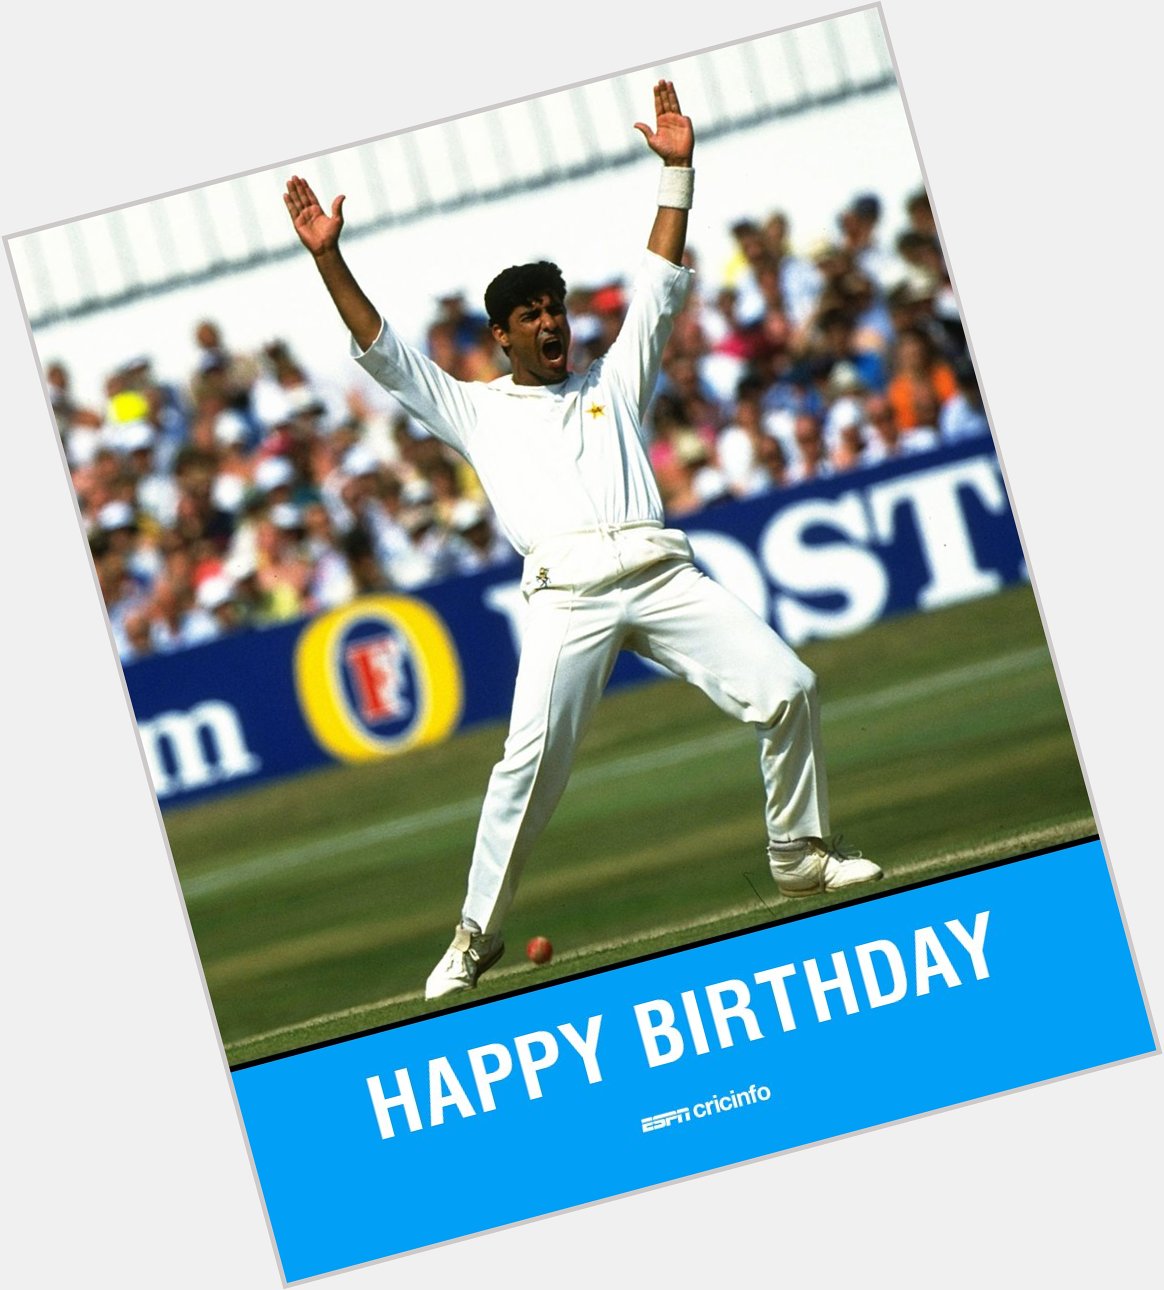  Happy birthday to Waqar Younis! Did you imitate his bowling action growing up? 

 